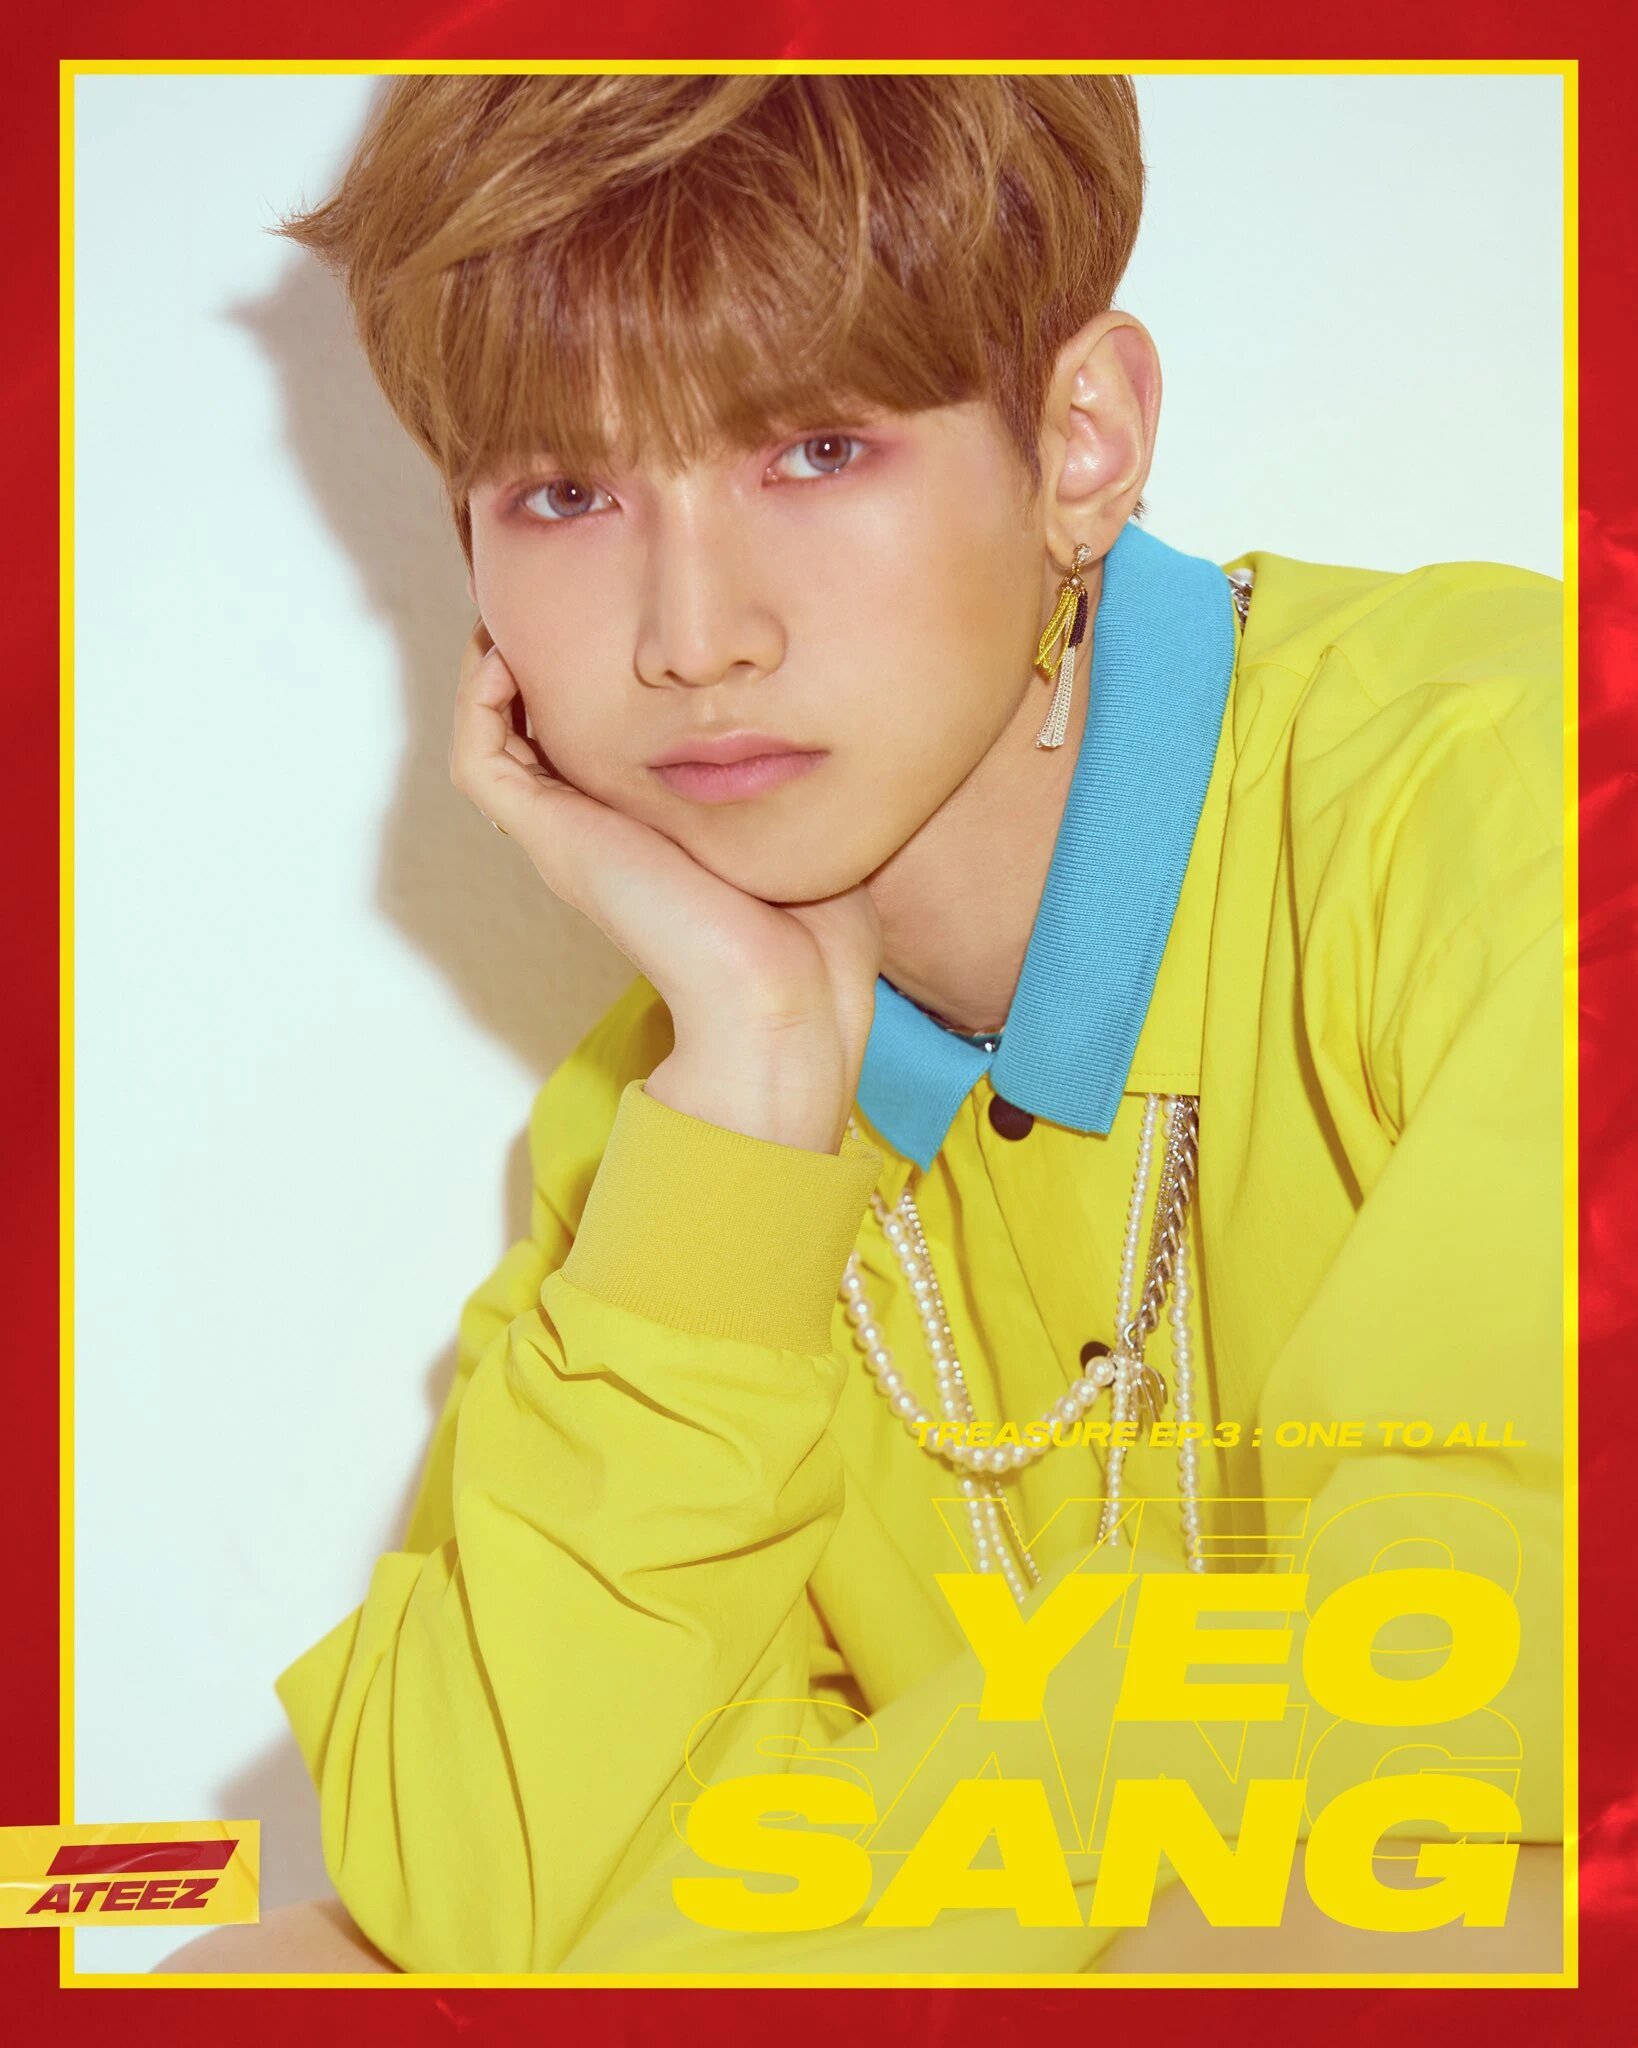 Ateez Treasure Ep.3: One to all Album Cover Photographic Print for Sale by  TheHermitCrab